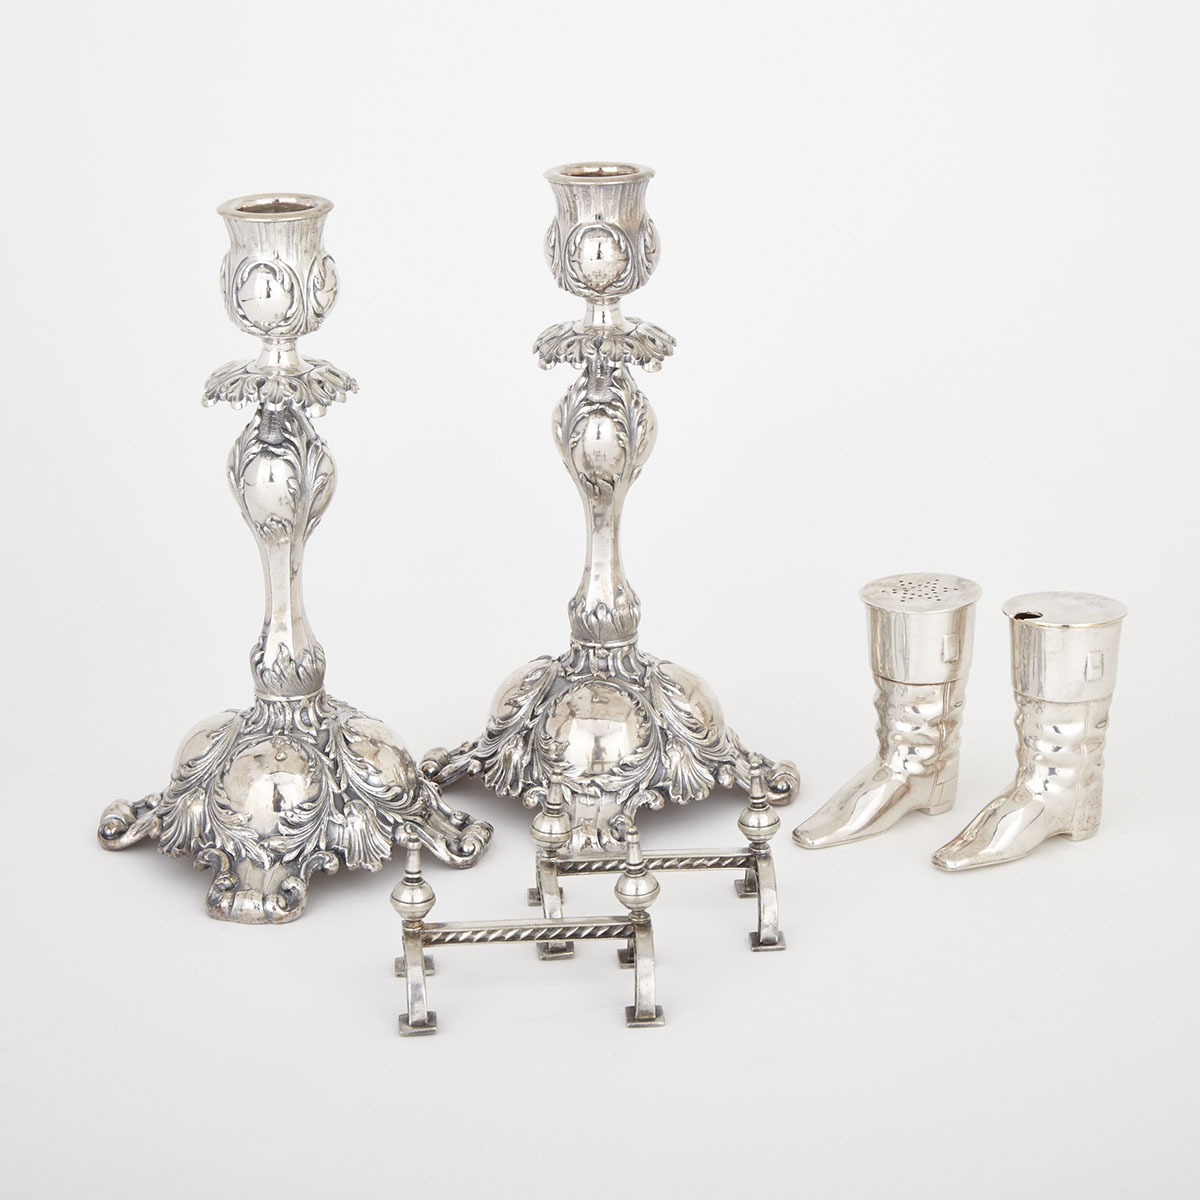 Pair of Silver Plated Candlesticks, Pair of Knife Rests and a Pair of Boot Form Condiments, late 19th century